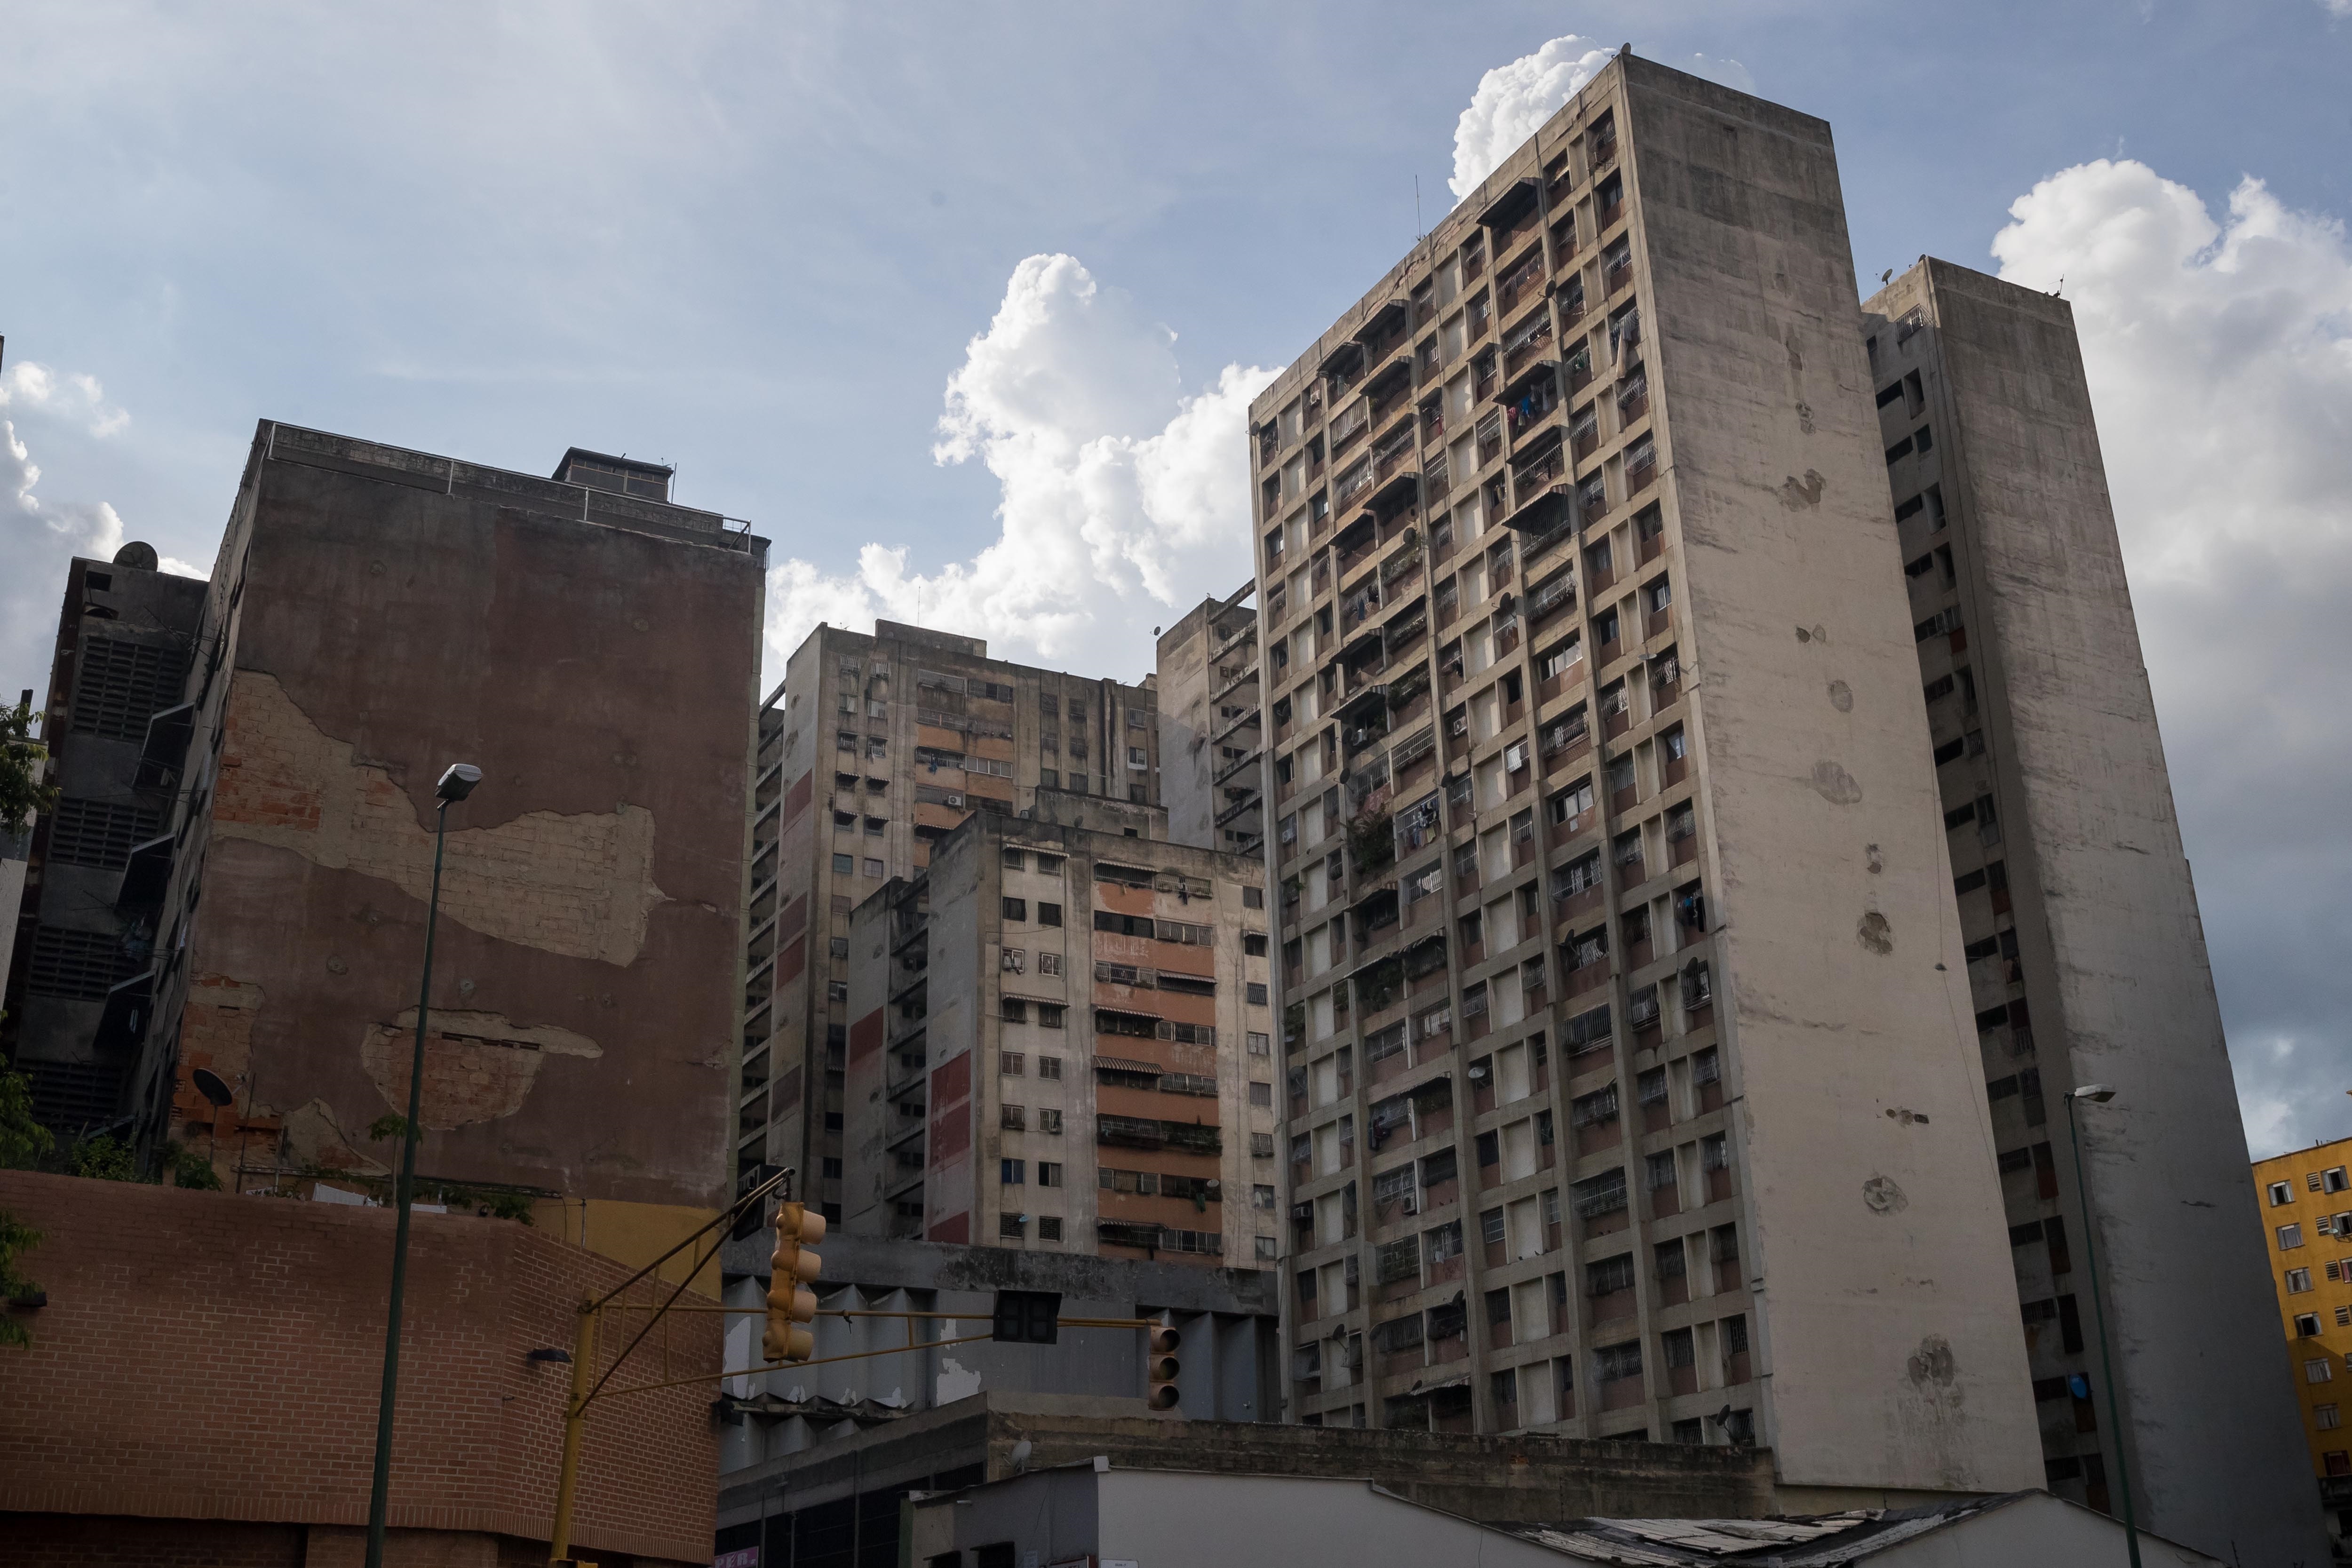 The Chavista Association proposes to reform the housing law “for the benefit” of tenants